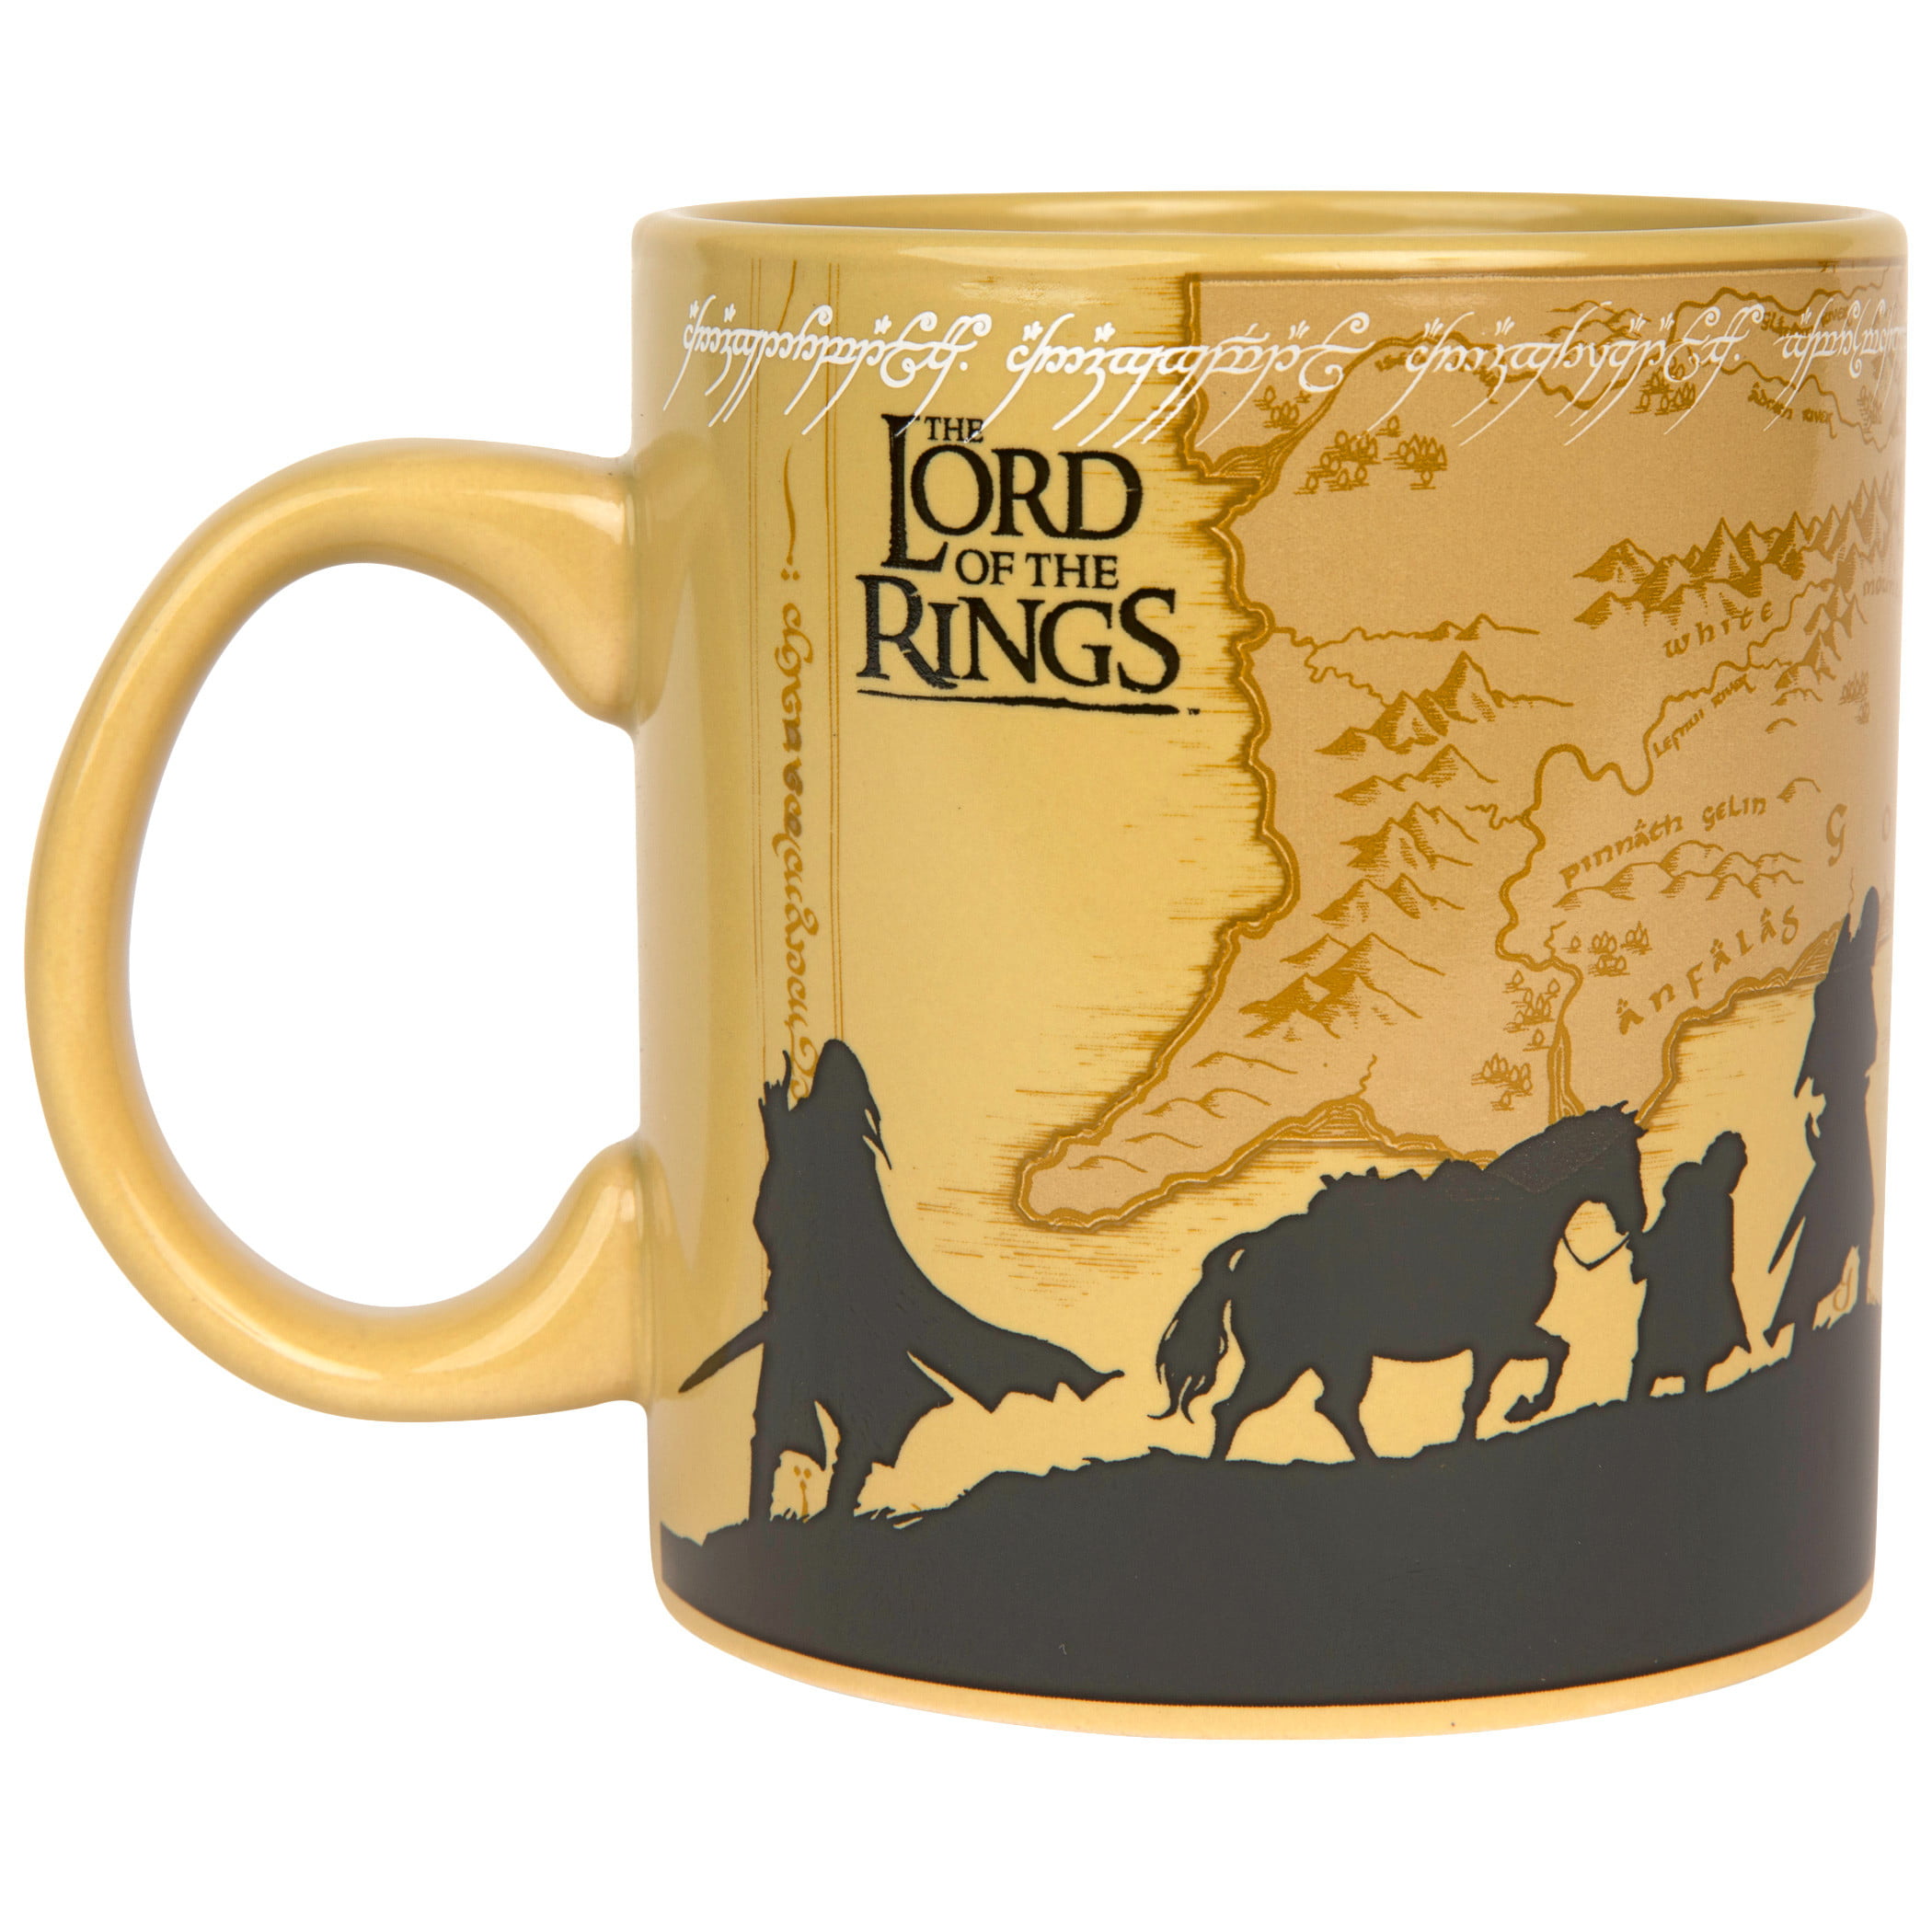 OFFICIAL LORD OF THE RINGS LOTR ONE RING MUG COFFEE CUP NEW IN GIFT BOX 